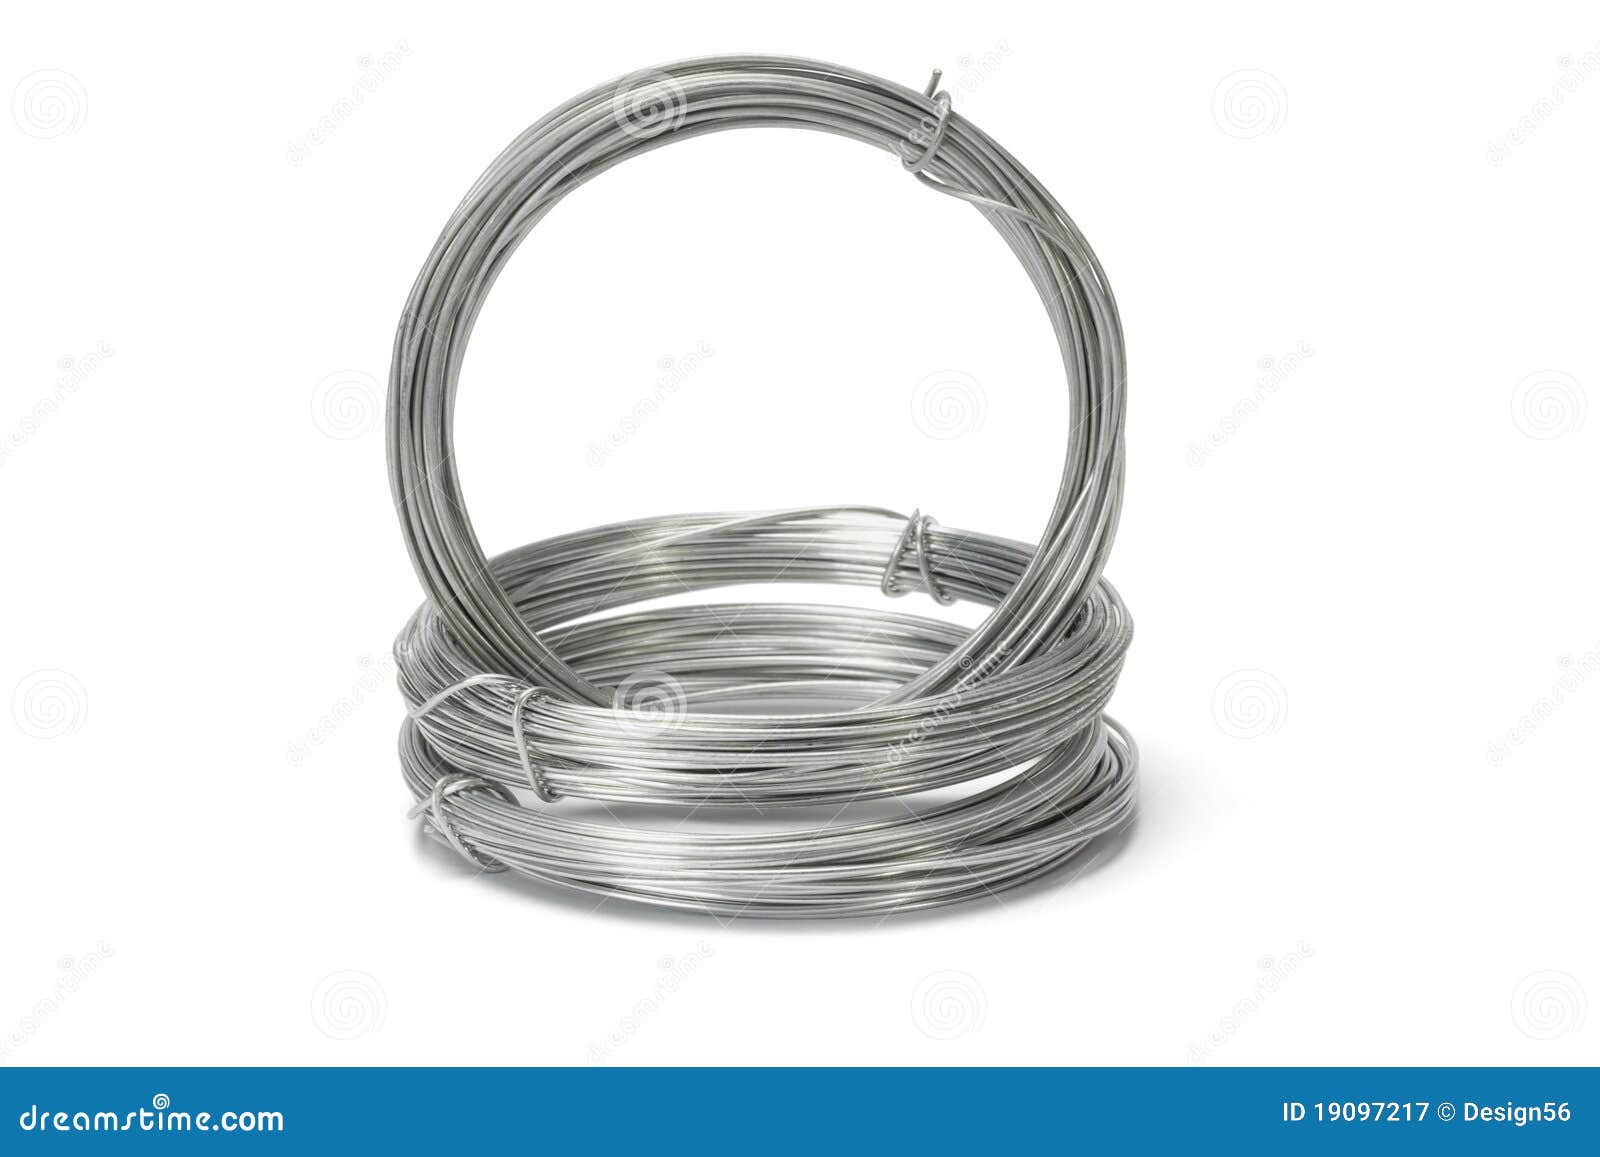 coils of galvanized wires